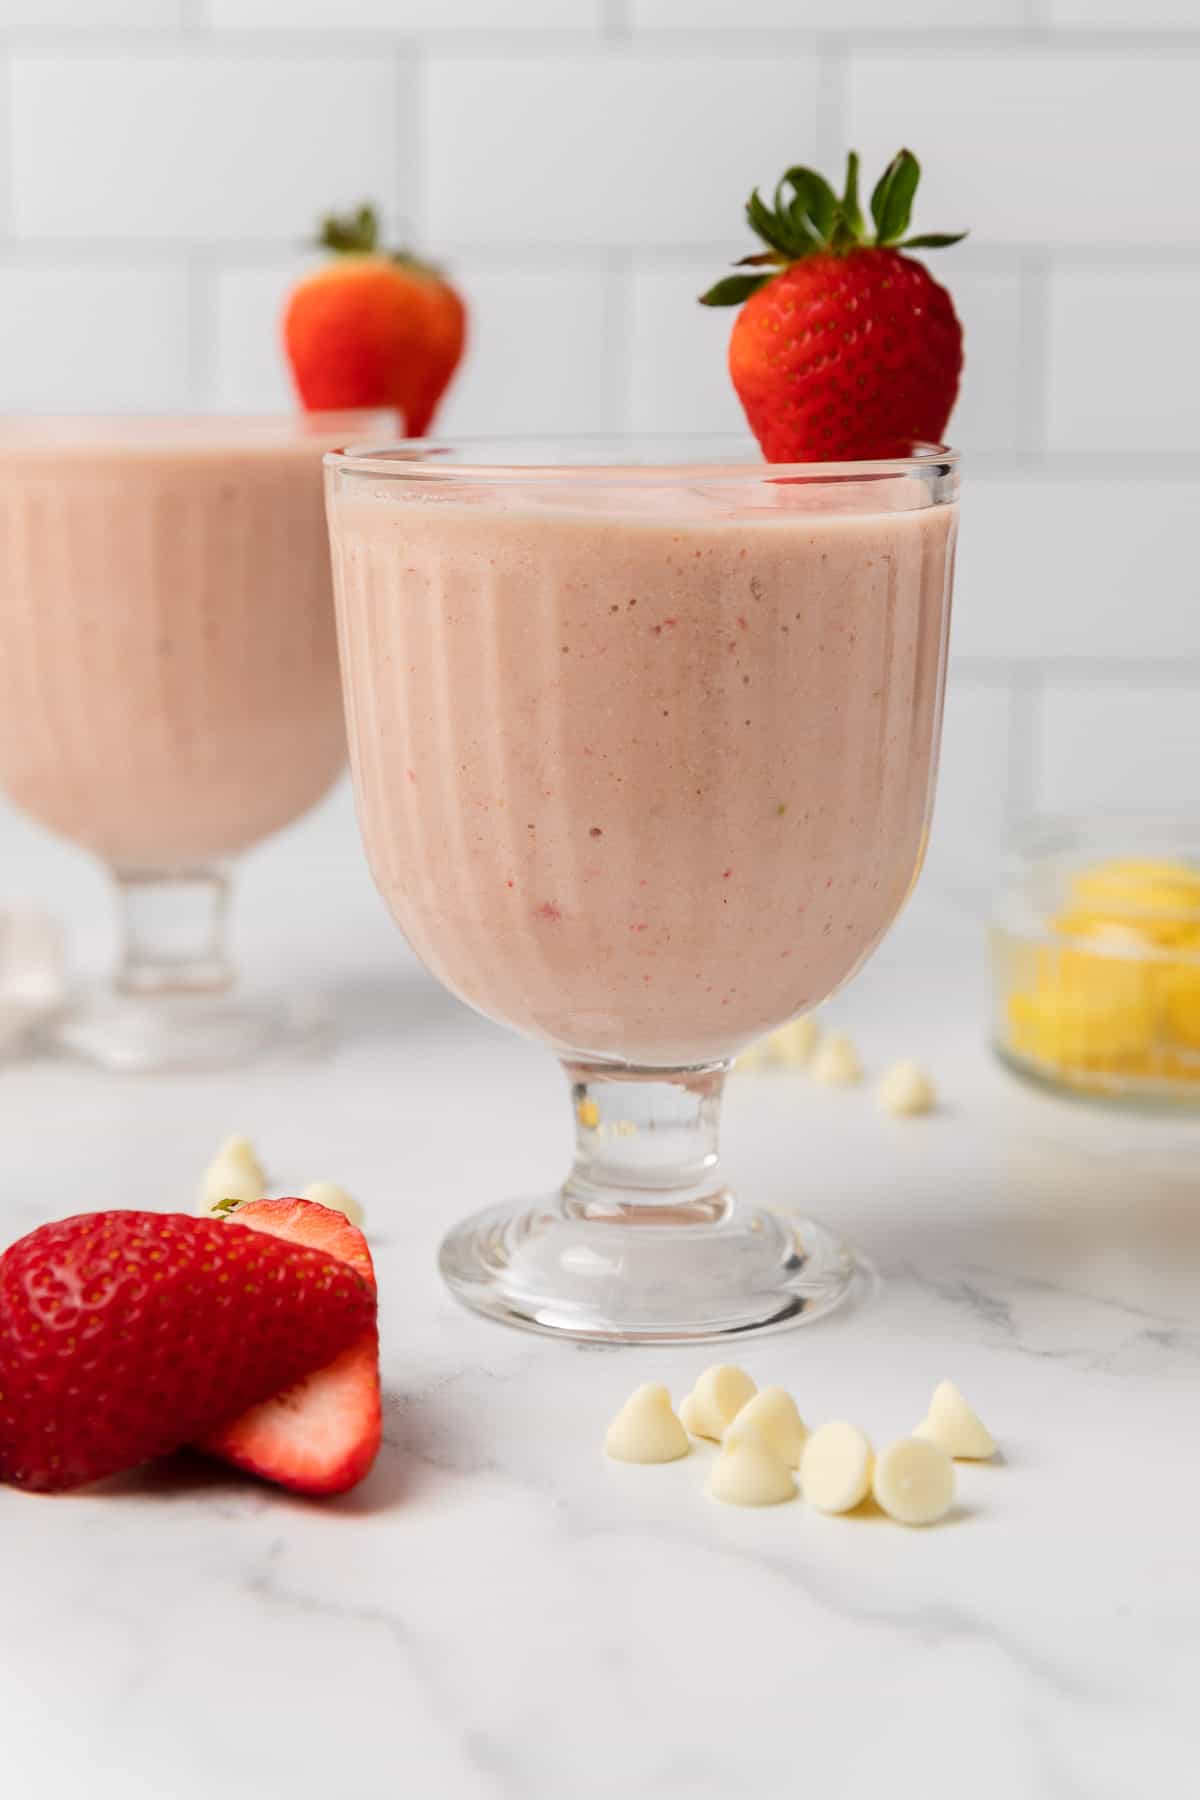 the completed smoothie recipe in a glass with a strawberry garnish on the rim